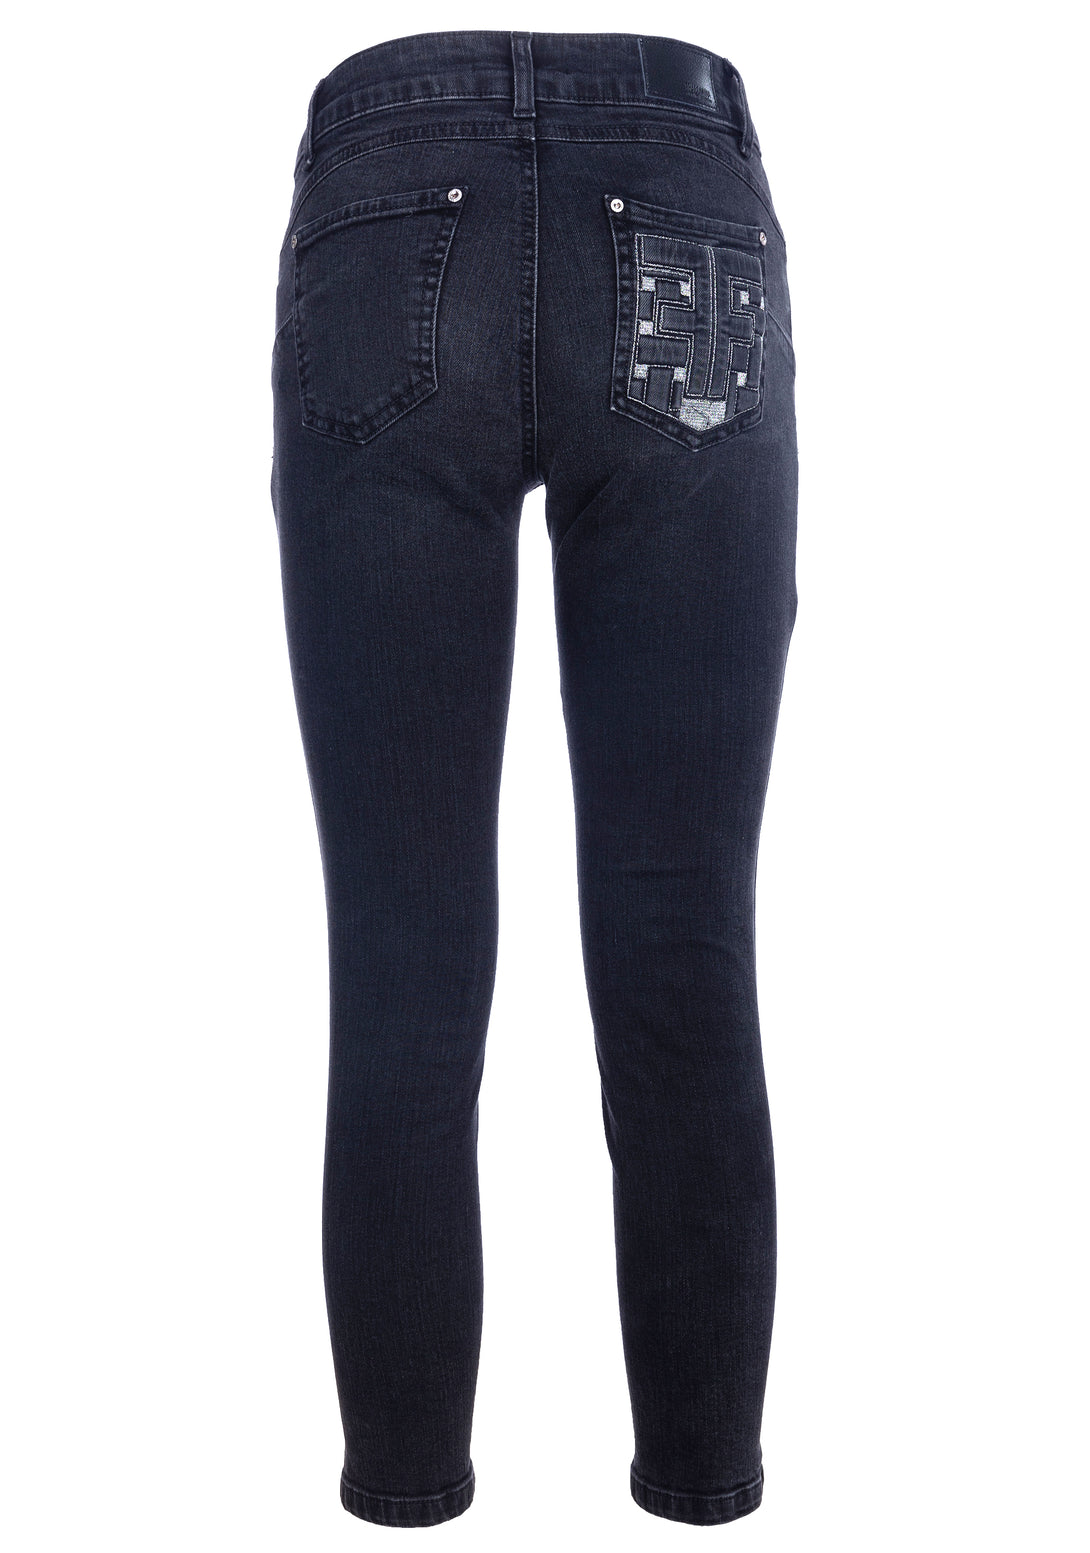 Jeans skinny fit cropped made in black denim with dark wash